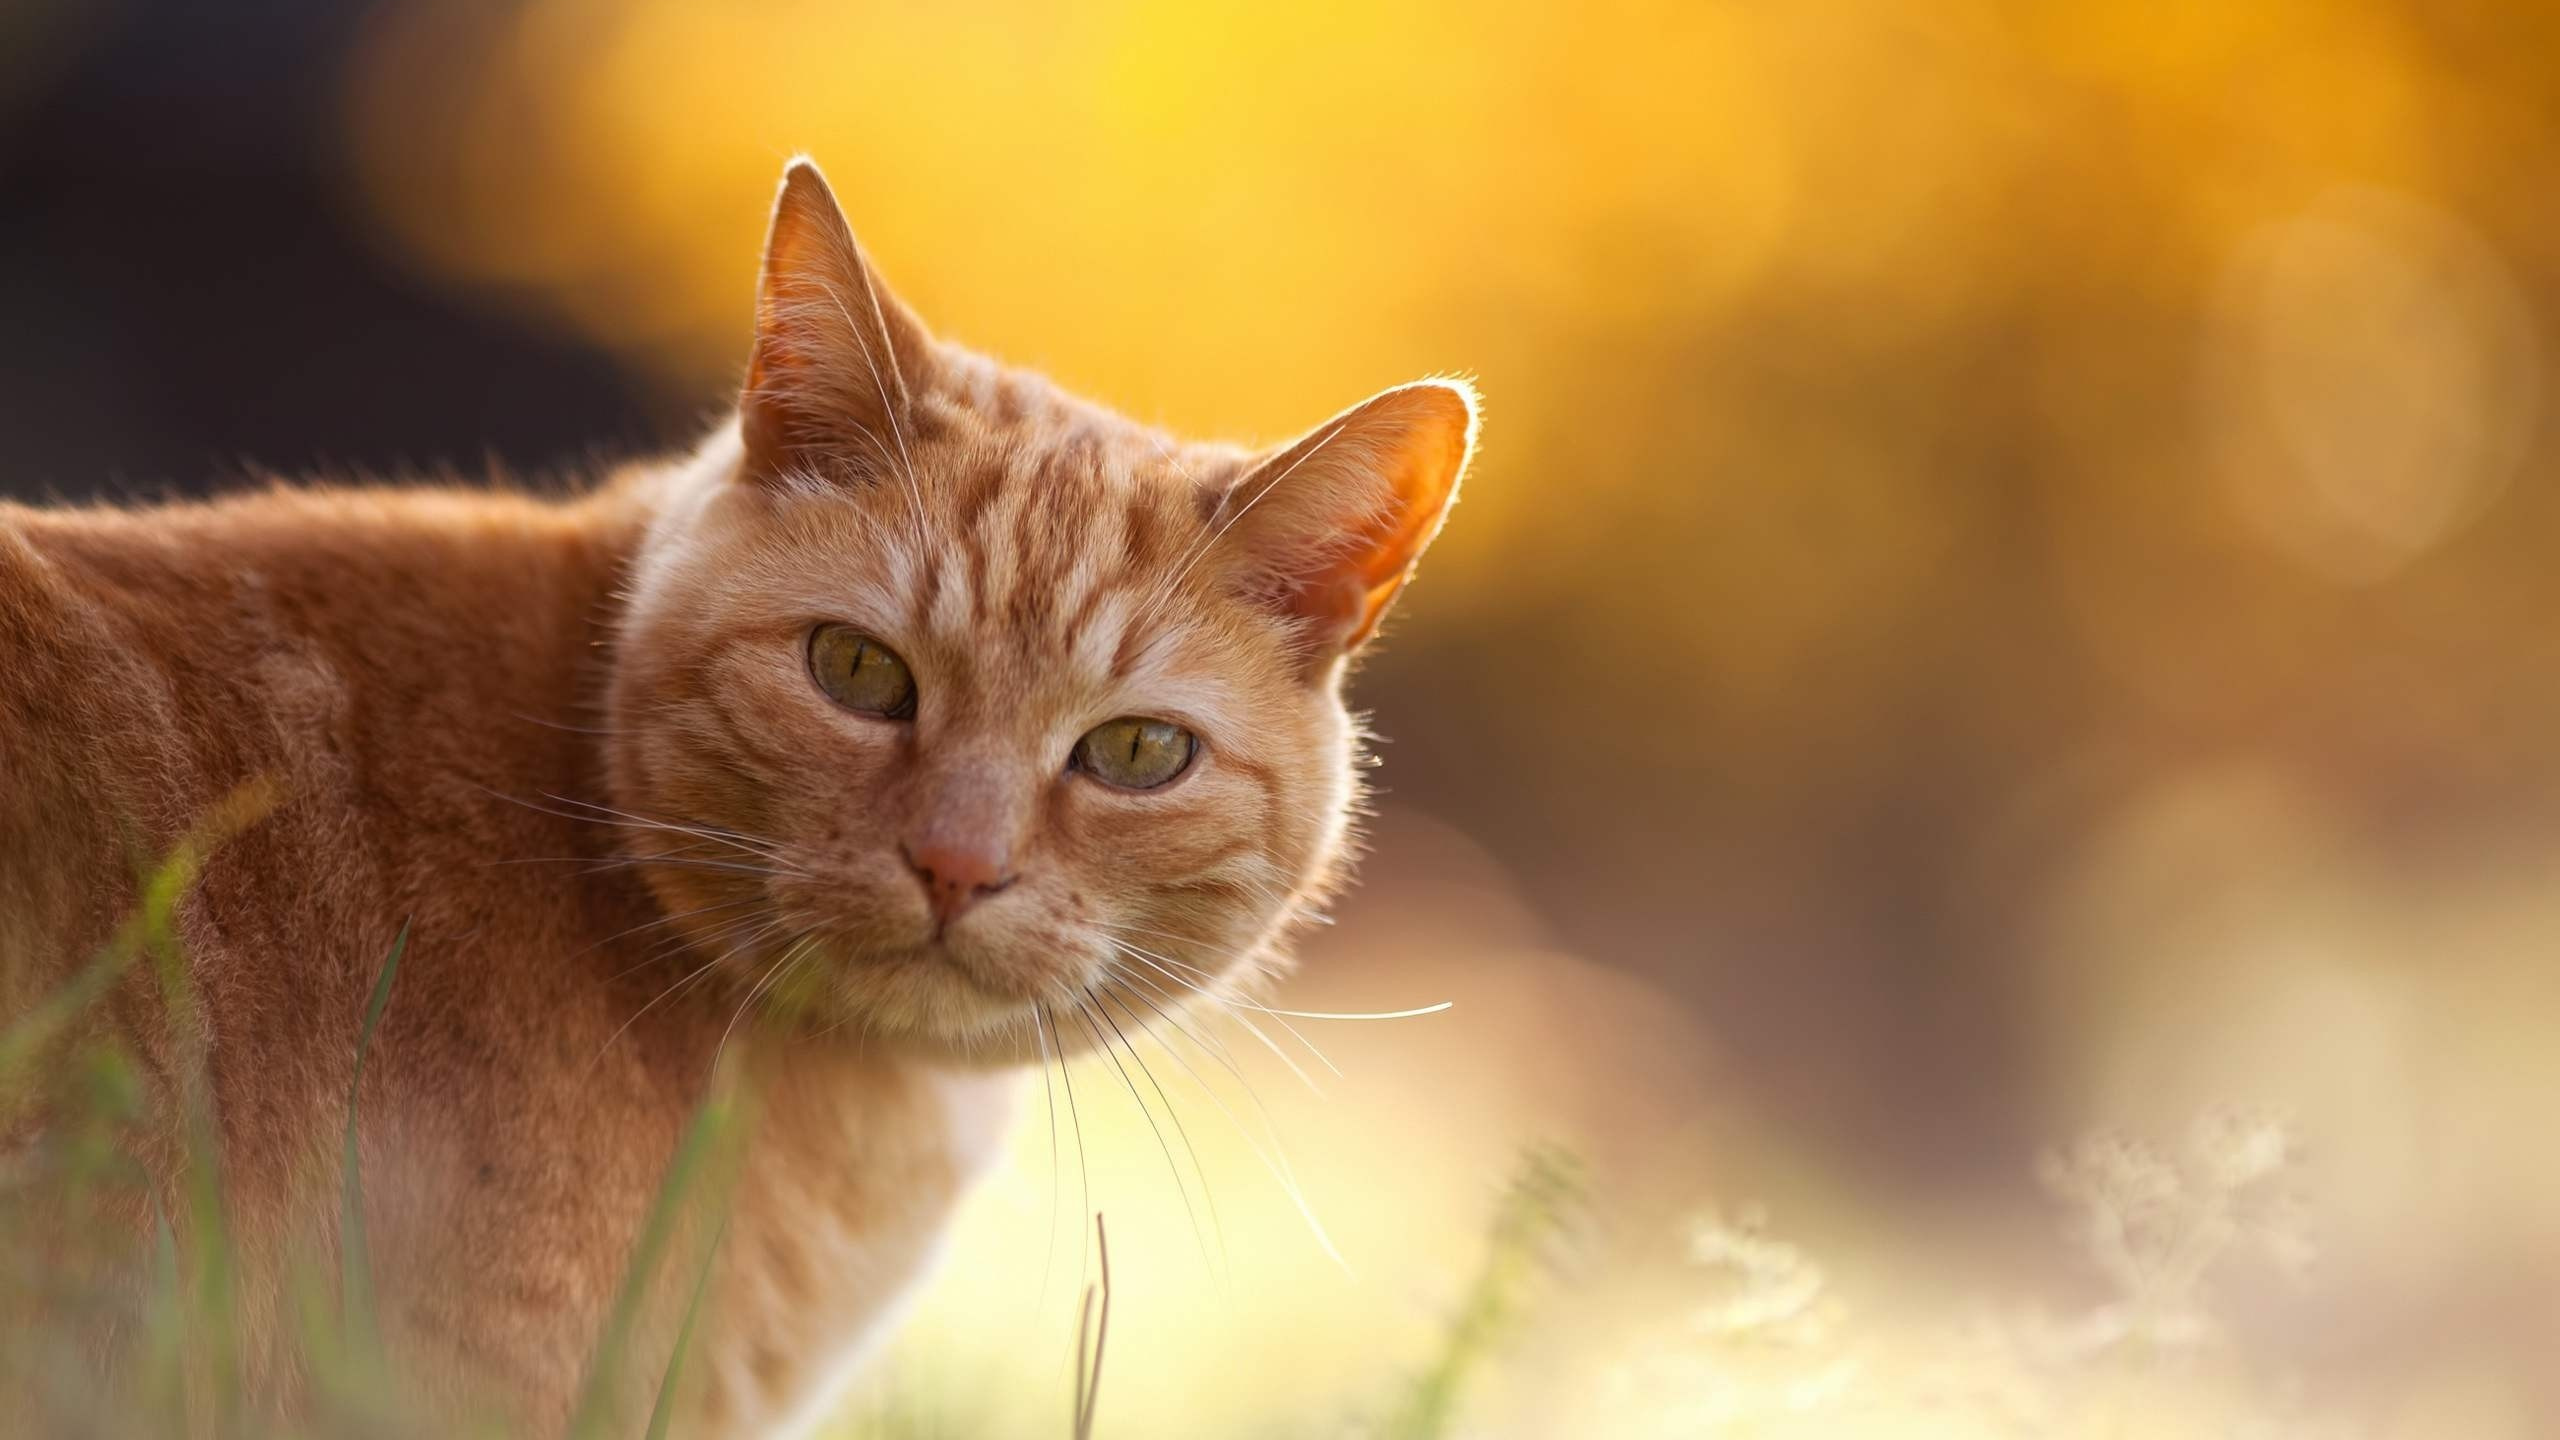 Orange Tabby Cat on Green Grass During Daytime. Wallpaper in 2560x1440 Resolution